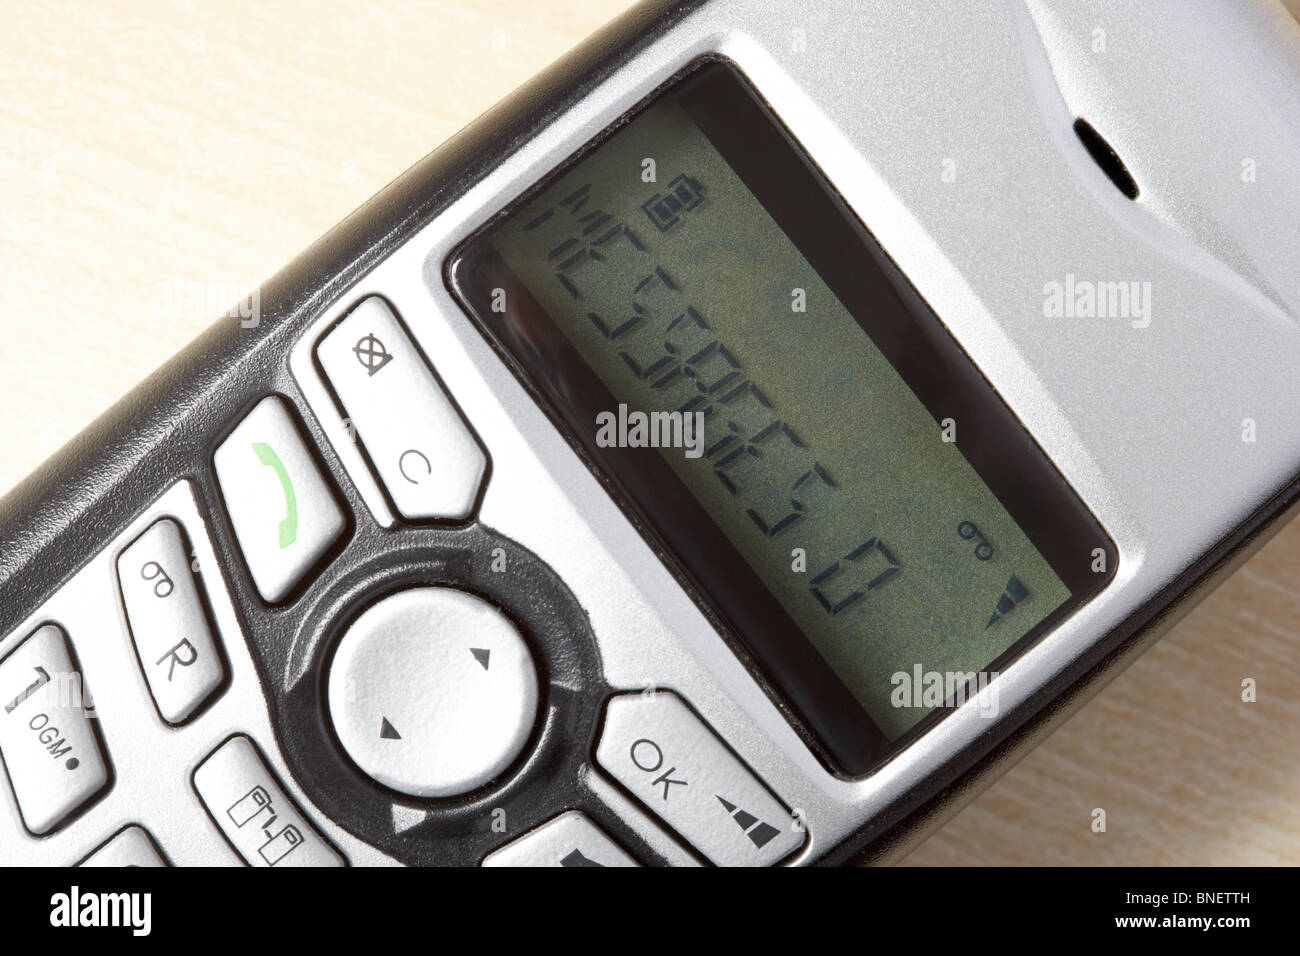 close up of 0 messages displayed on dect phone screen Stock Photo